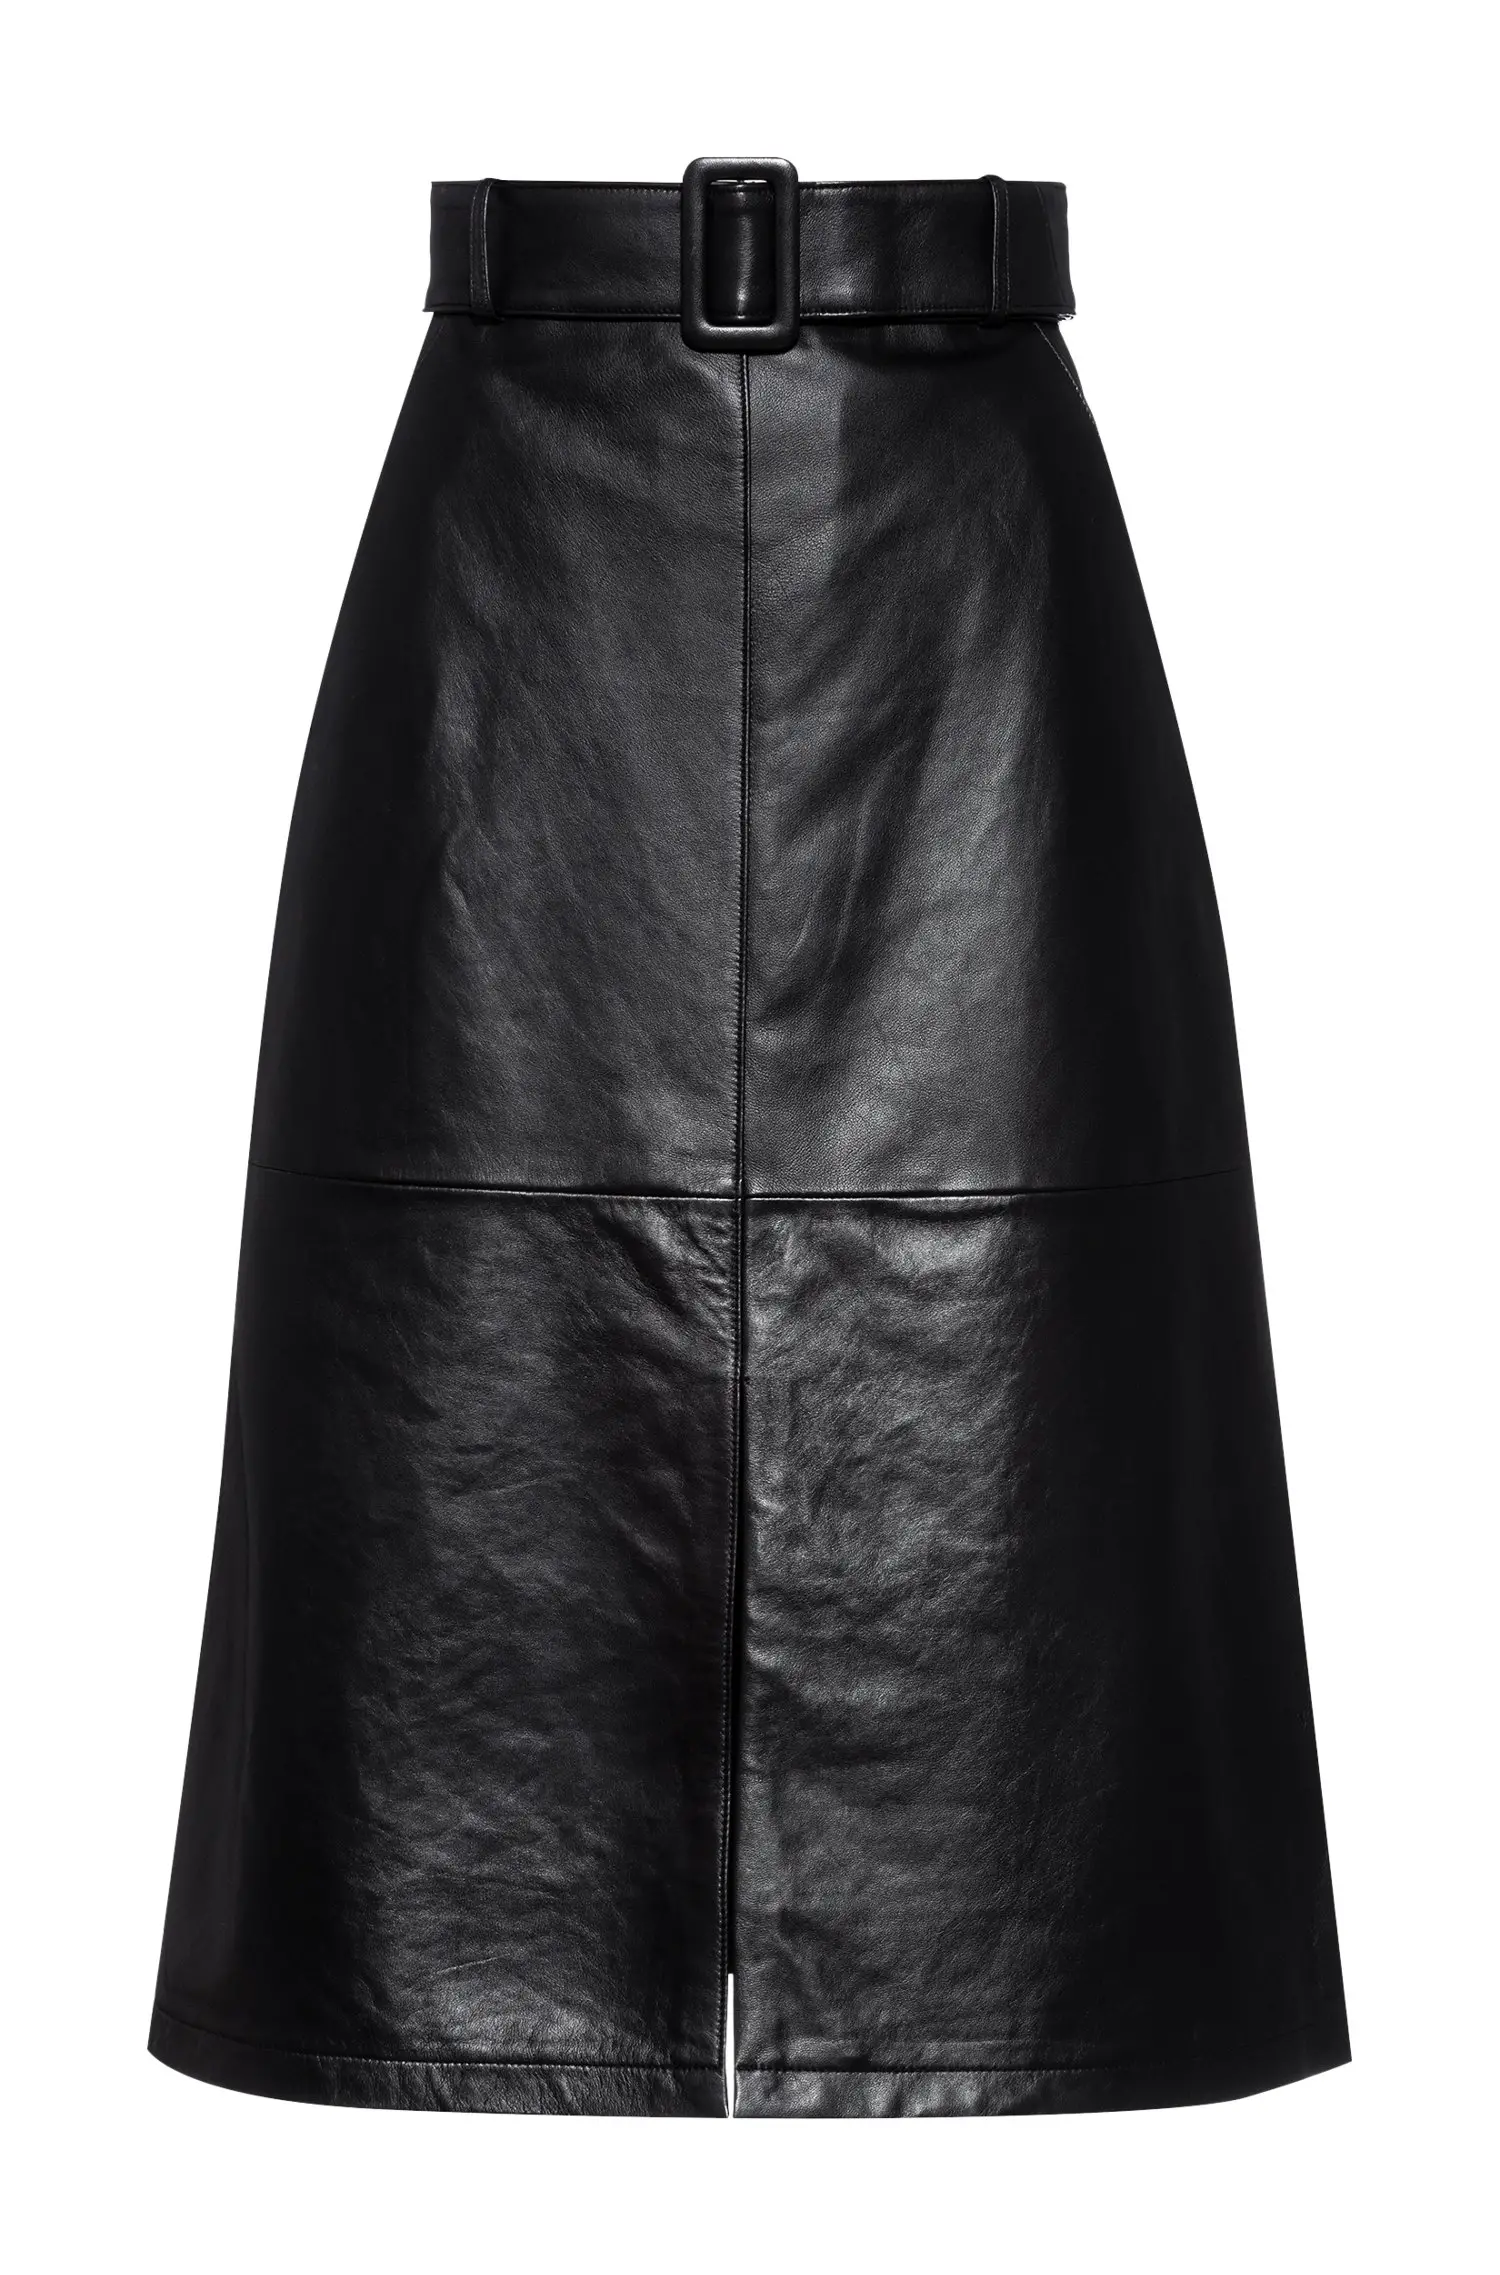 Queen paired the top with Hugo Boss Leshina Leather A-line skirt